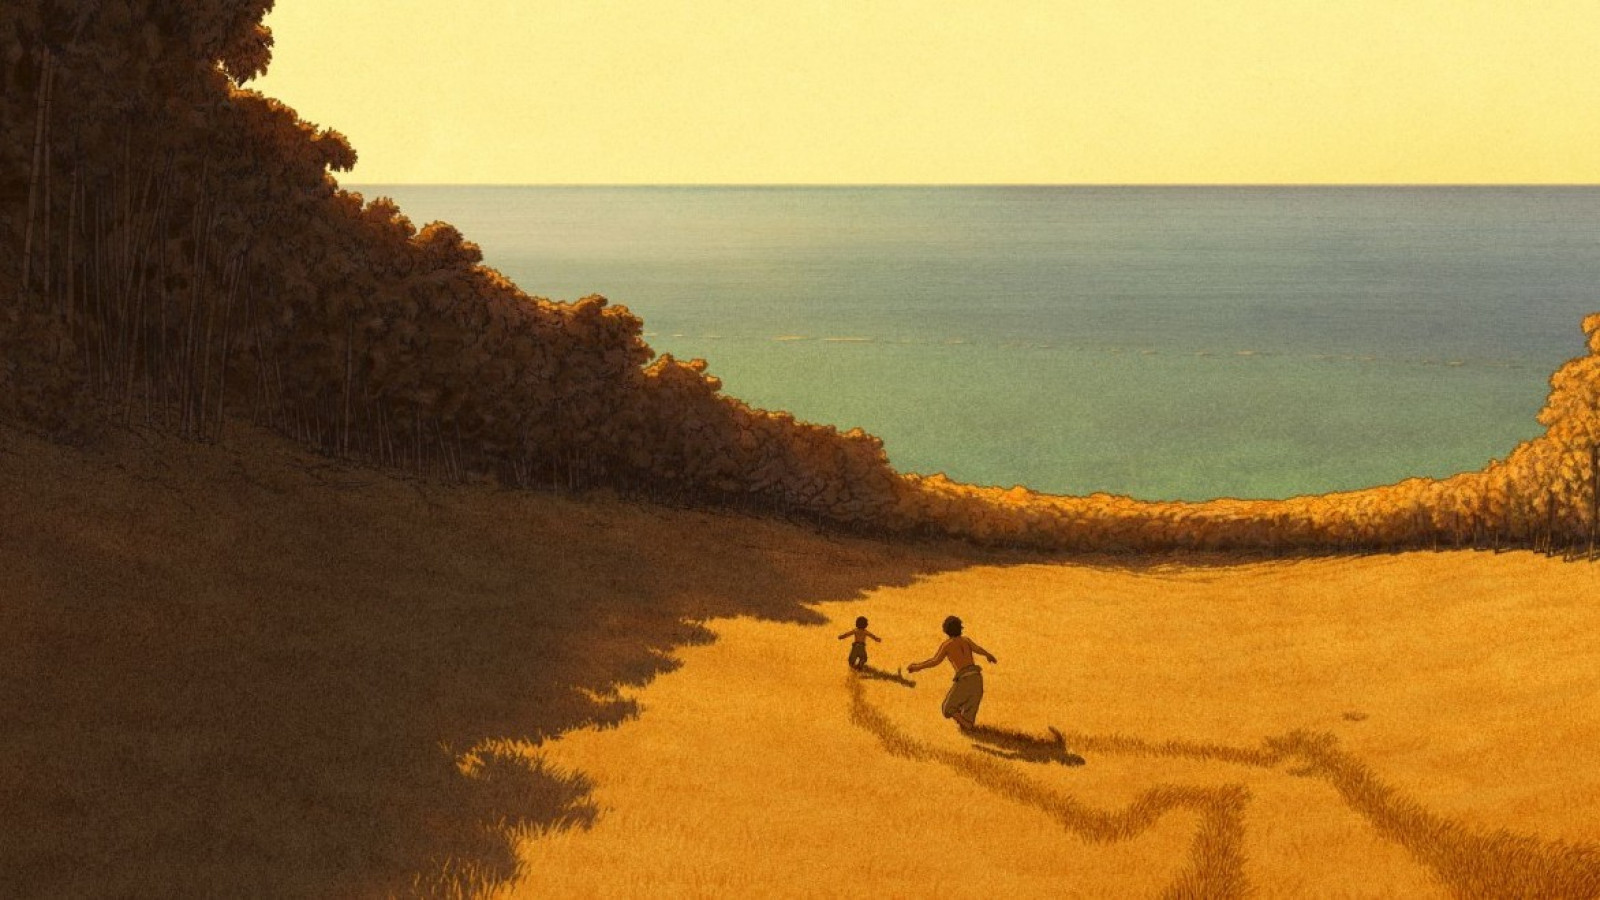 “The Red Turtle” by Michael Dudok de Wit